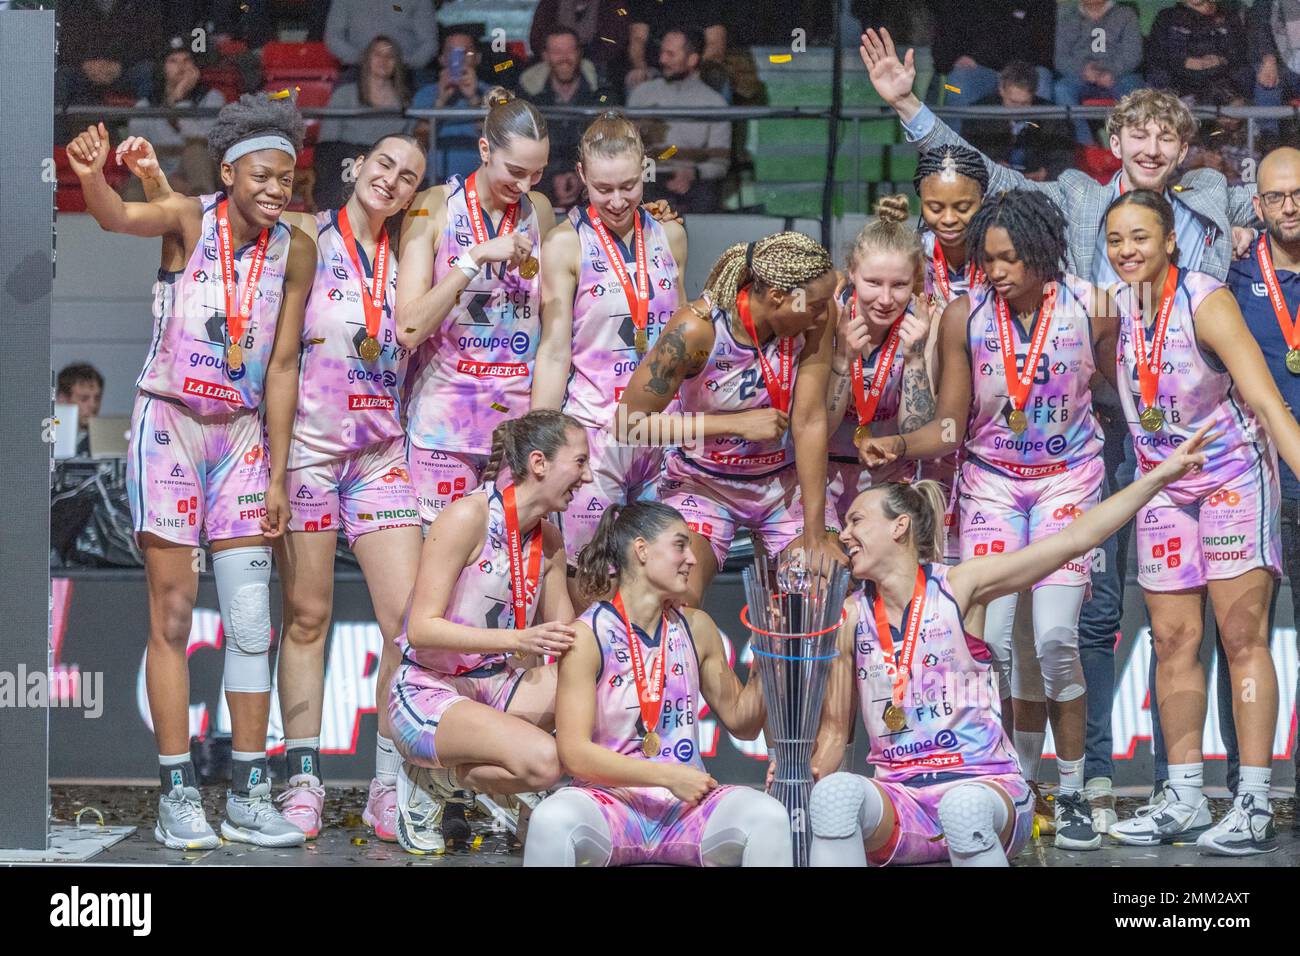 Montreux Switzerland, 01/29/2023: The BCF Elfic Bribourg team celebrates during Awards Ceremony of the Final of Swiss Basketball League 2023. The final of the Swiss Basketball League took place at the Perrier sports hall in the famous town of Montreux-Clarens. (Credit: Eric Dubost/Alamy Live News). Stock Photo